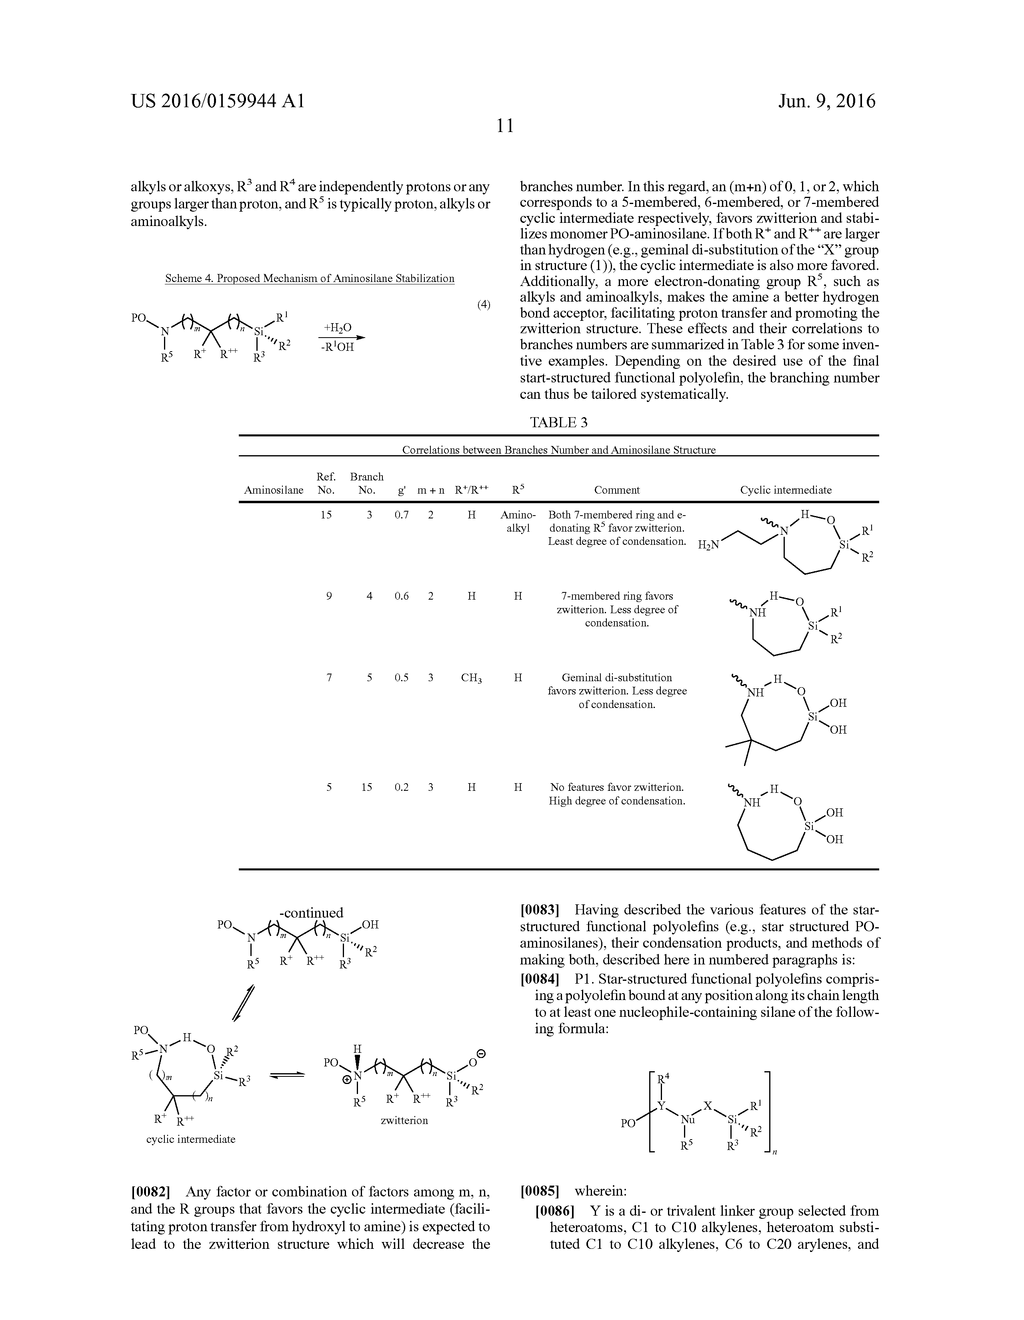 Stable Star-Structured Functional Polyolefins - diagram, schematic, and image 17